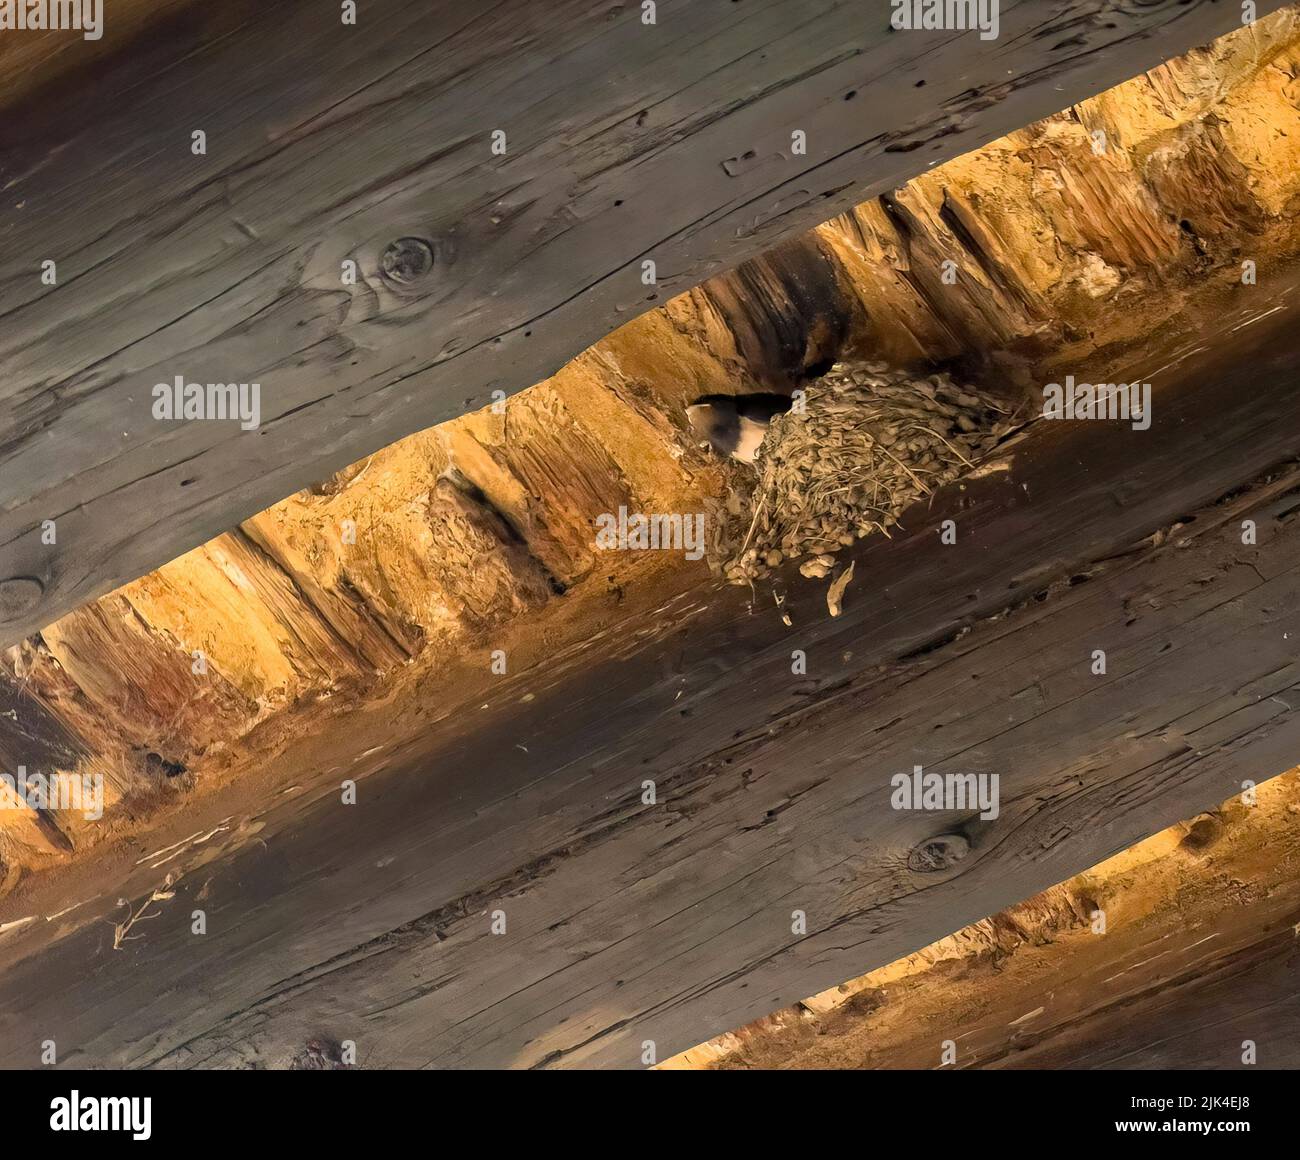 a barn swallow (Hirundo rustica) nest built against wooden ceiling rafter joists, illuminated by warm lighting at night Stock Photo